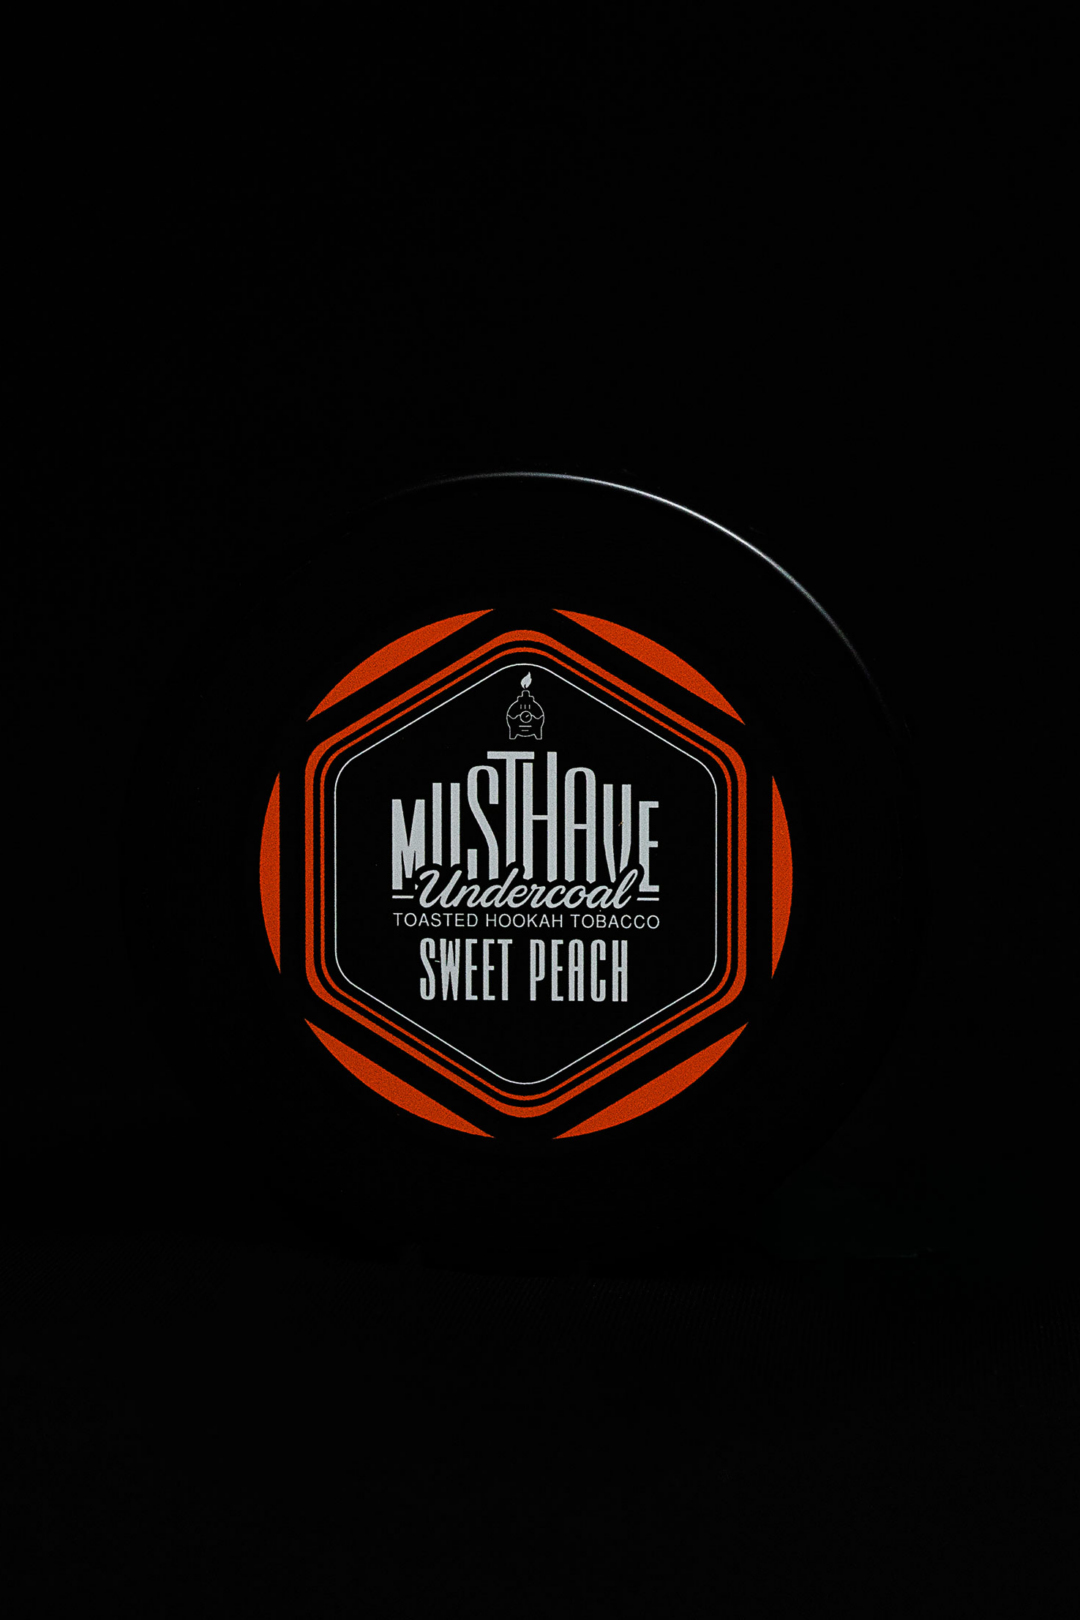 Musthave SWEET PEACH